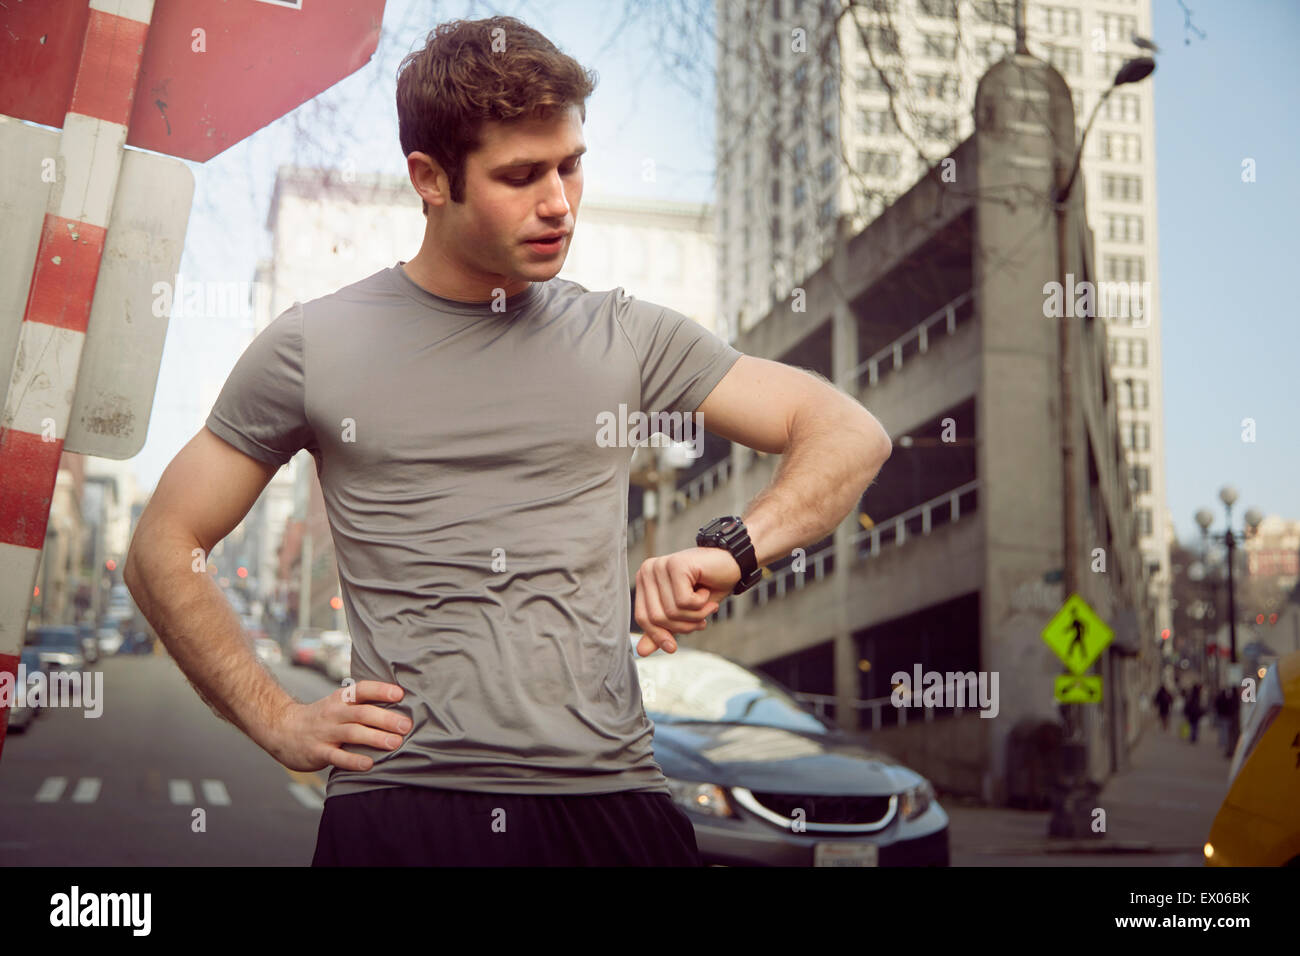 Young male runner checking wristwatch, Pioneer Square, Seattle, USA Stock Photo